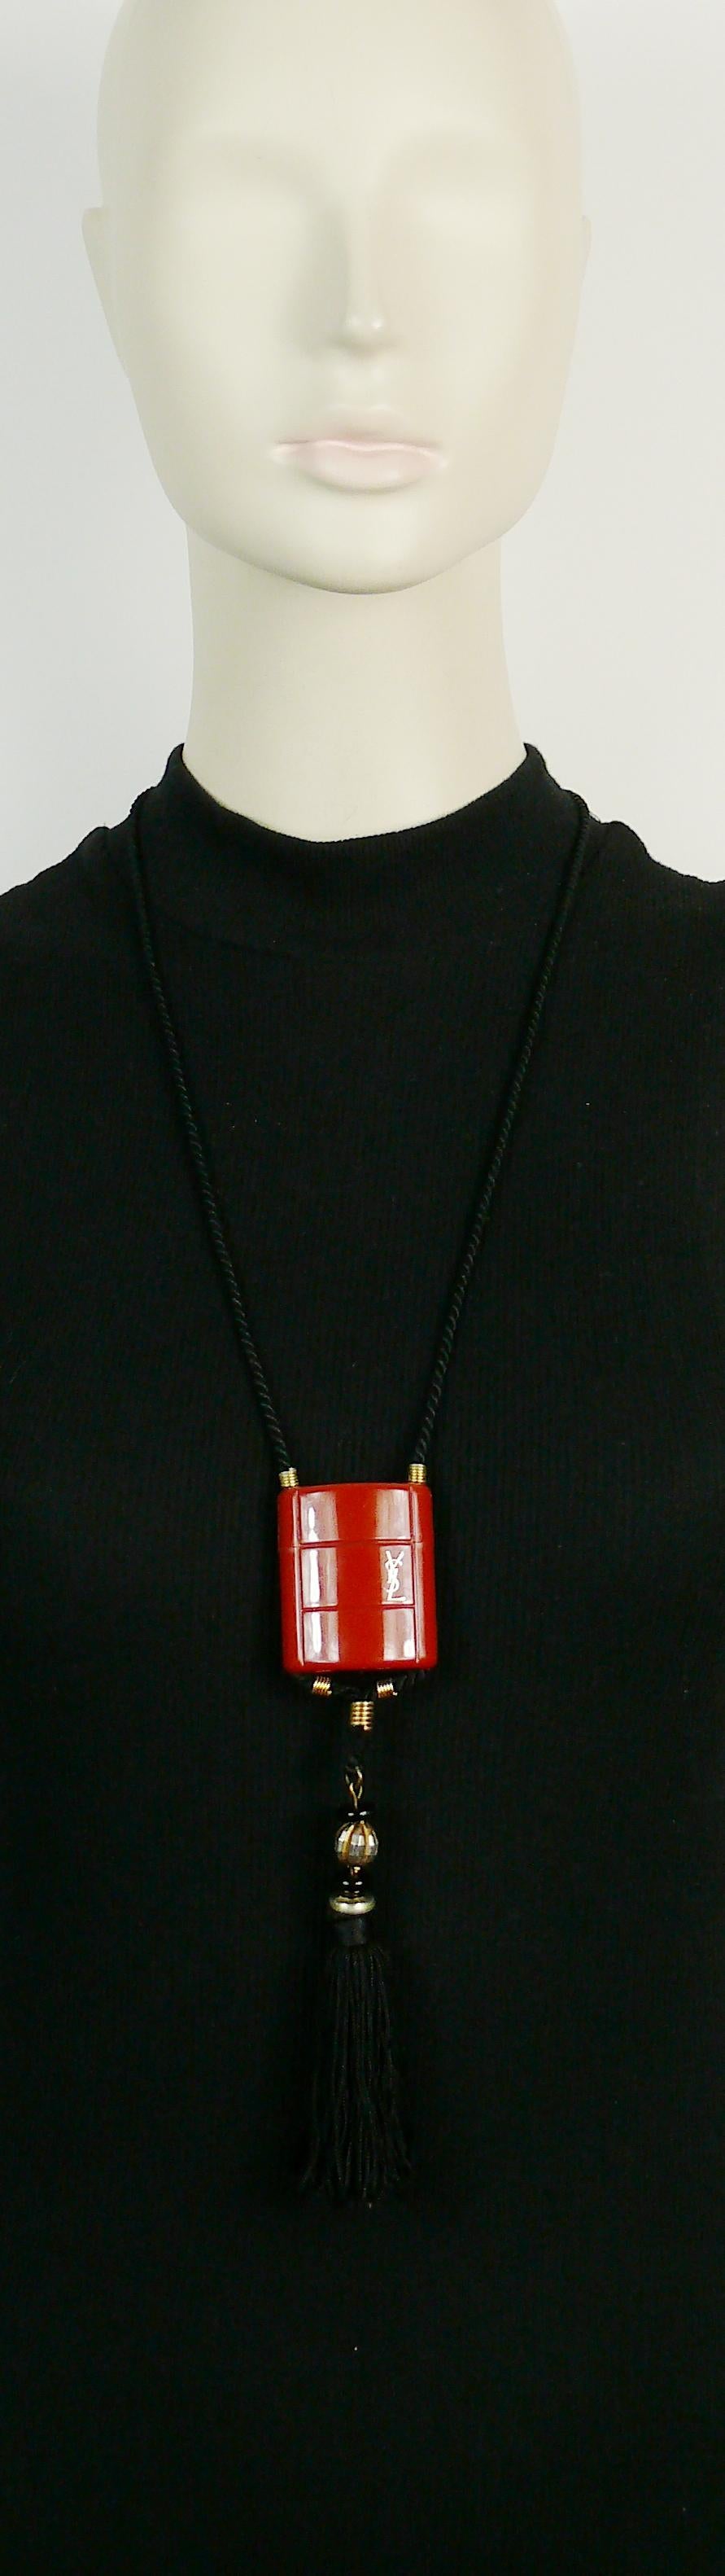 YVES SAINT LAURENT vintage OPIUM inro pendant necklace.

This necklace consists of a black cord, a burnt orange plastic container, a silk tassel adorned with black and gold tone beads.

Plastic container opens to insert a miniature bottle (empty